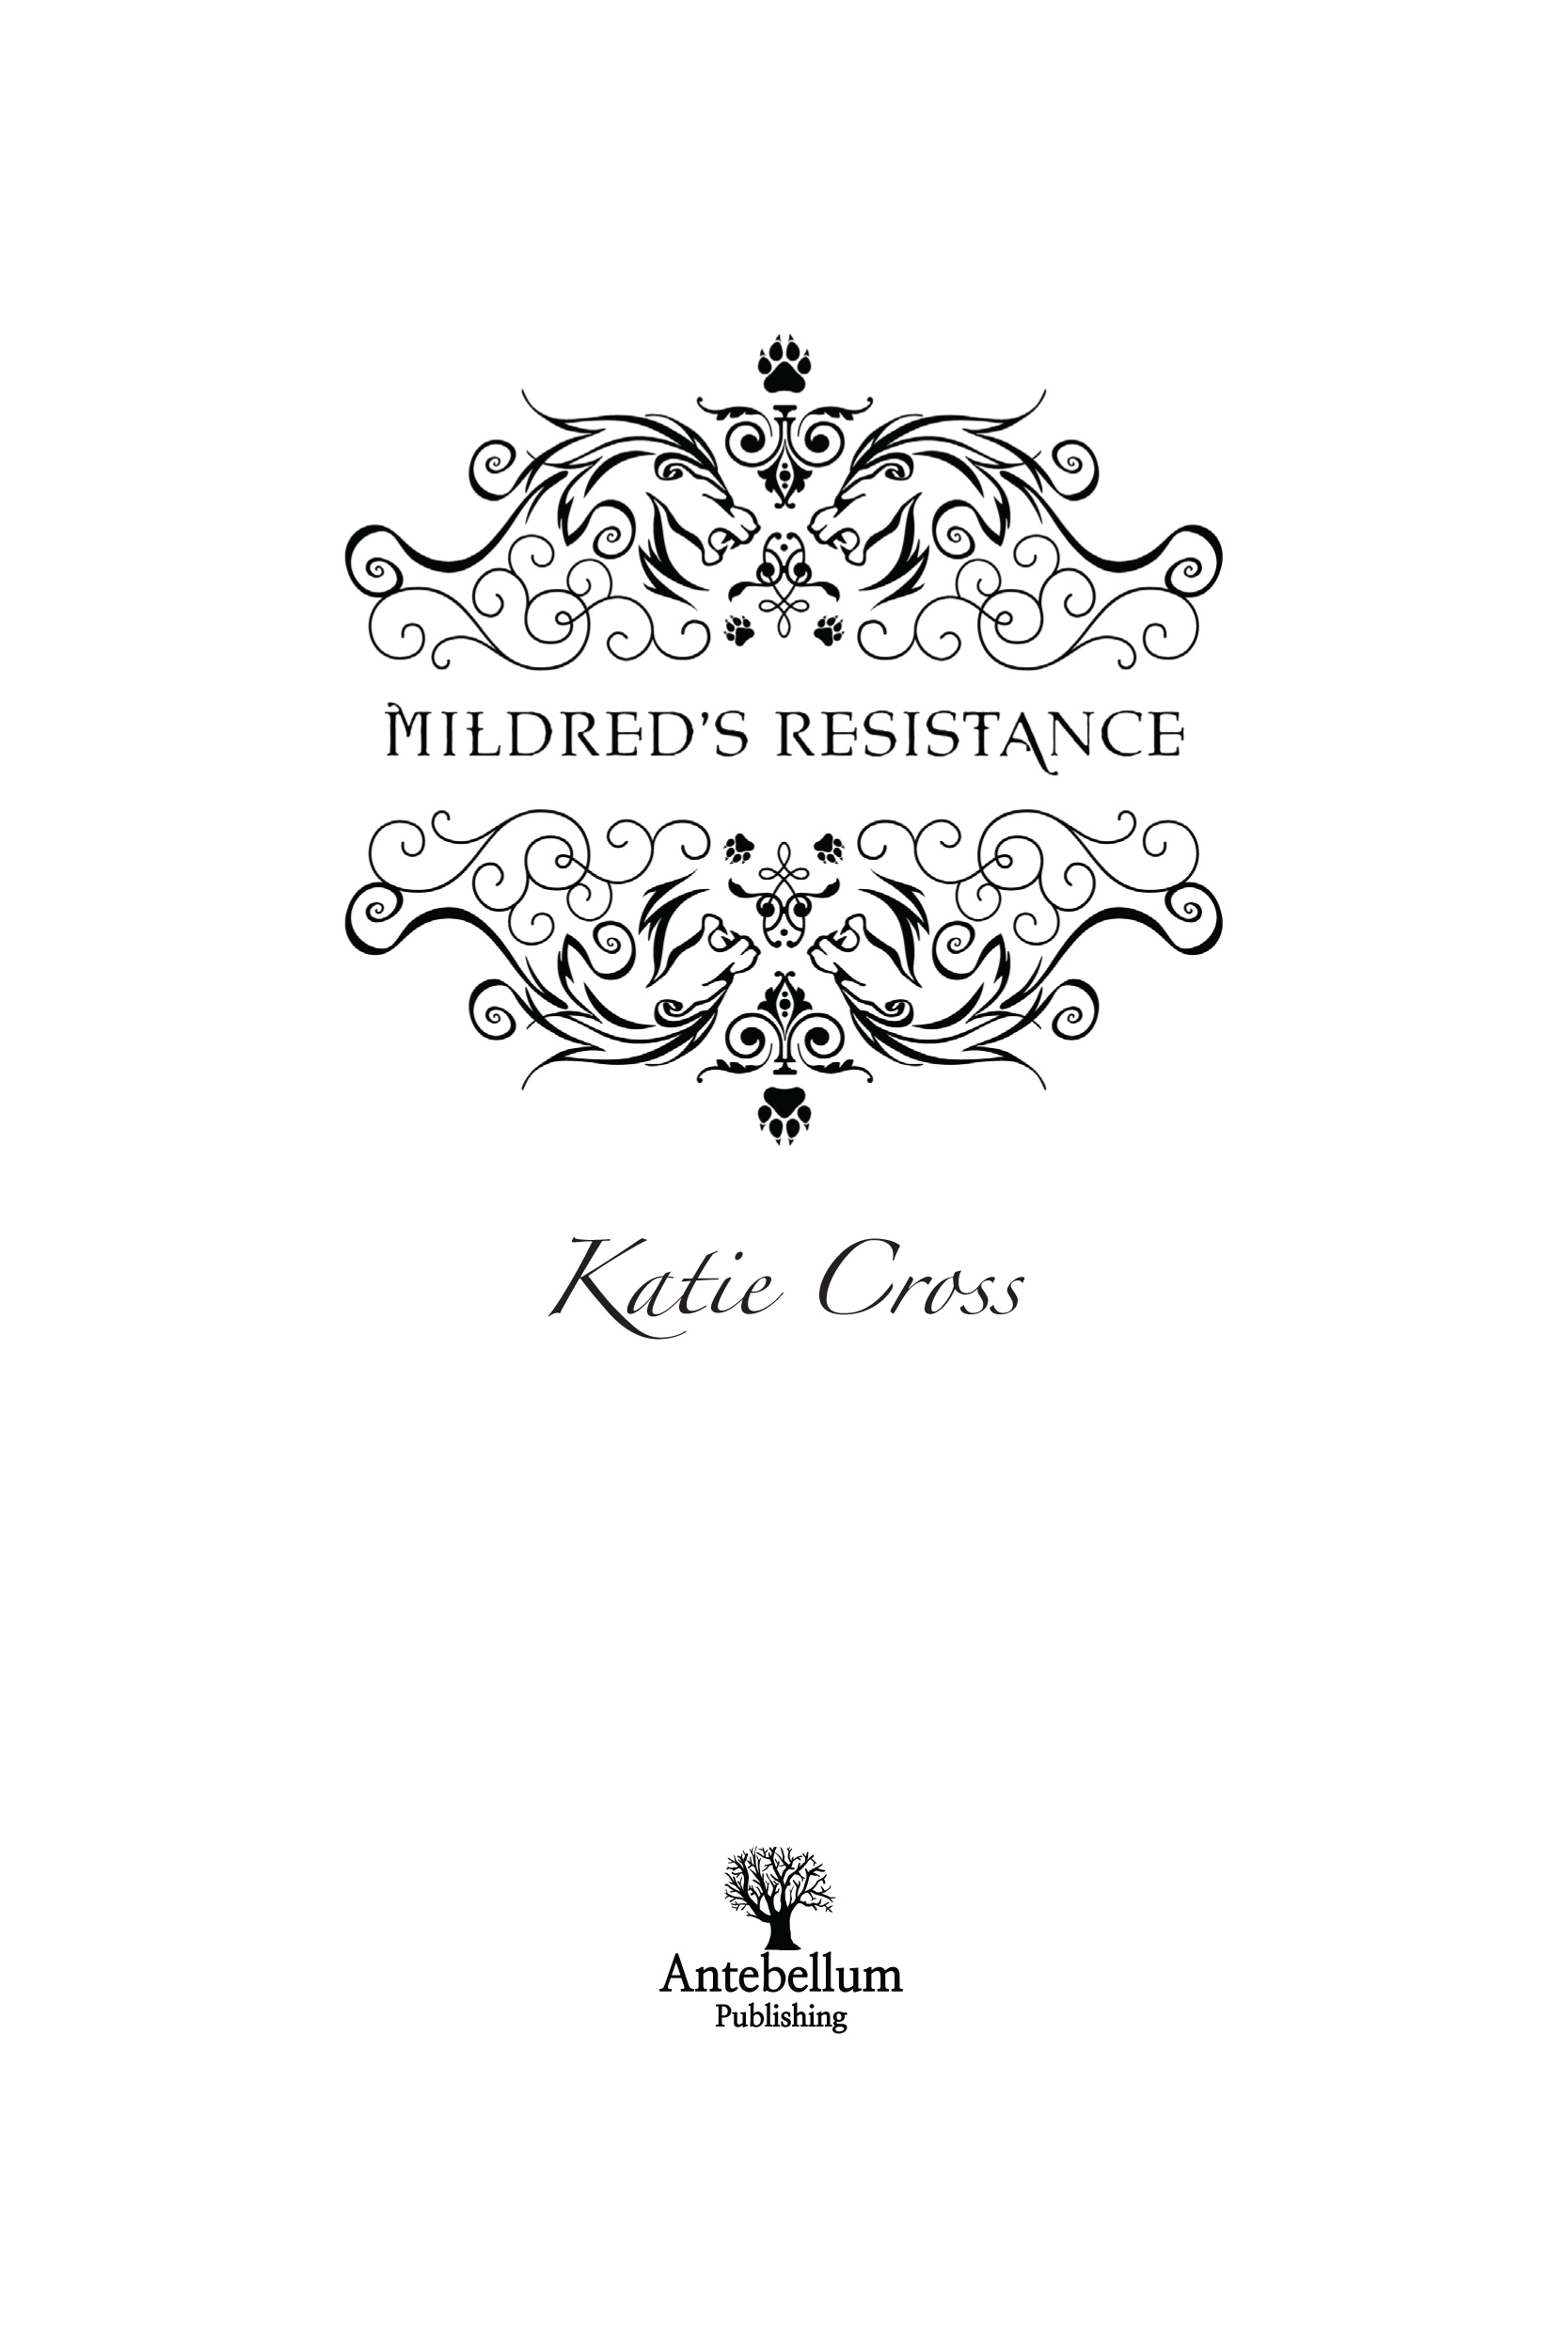 Mildreds Resistance Young Adult Fantasy Text copyright 2015 by Katie Cross - photo 2